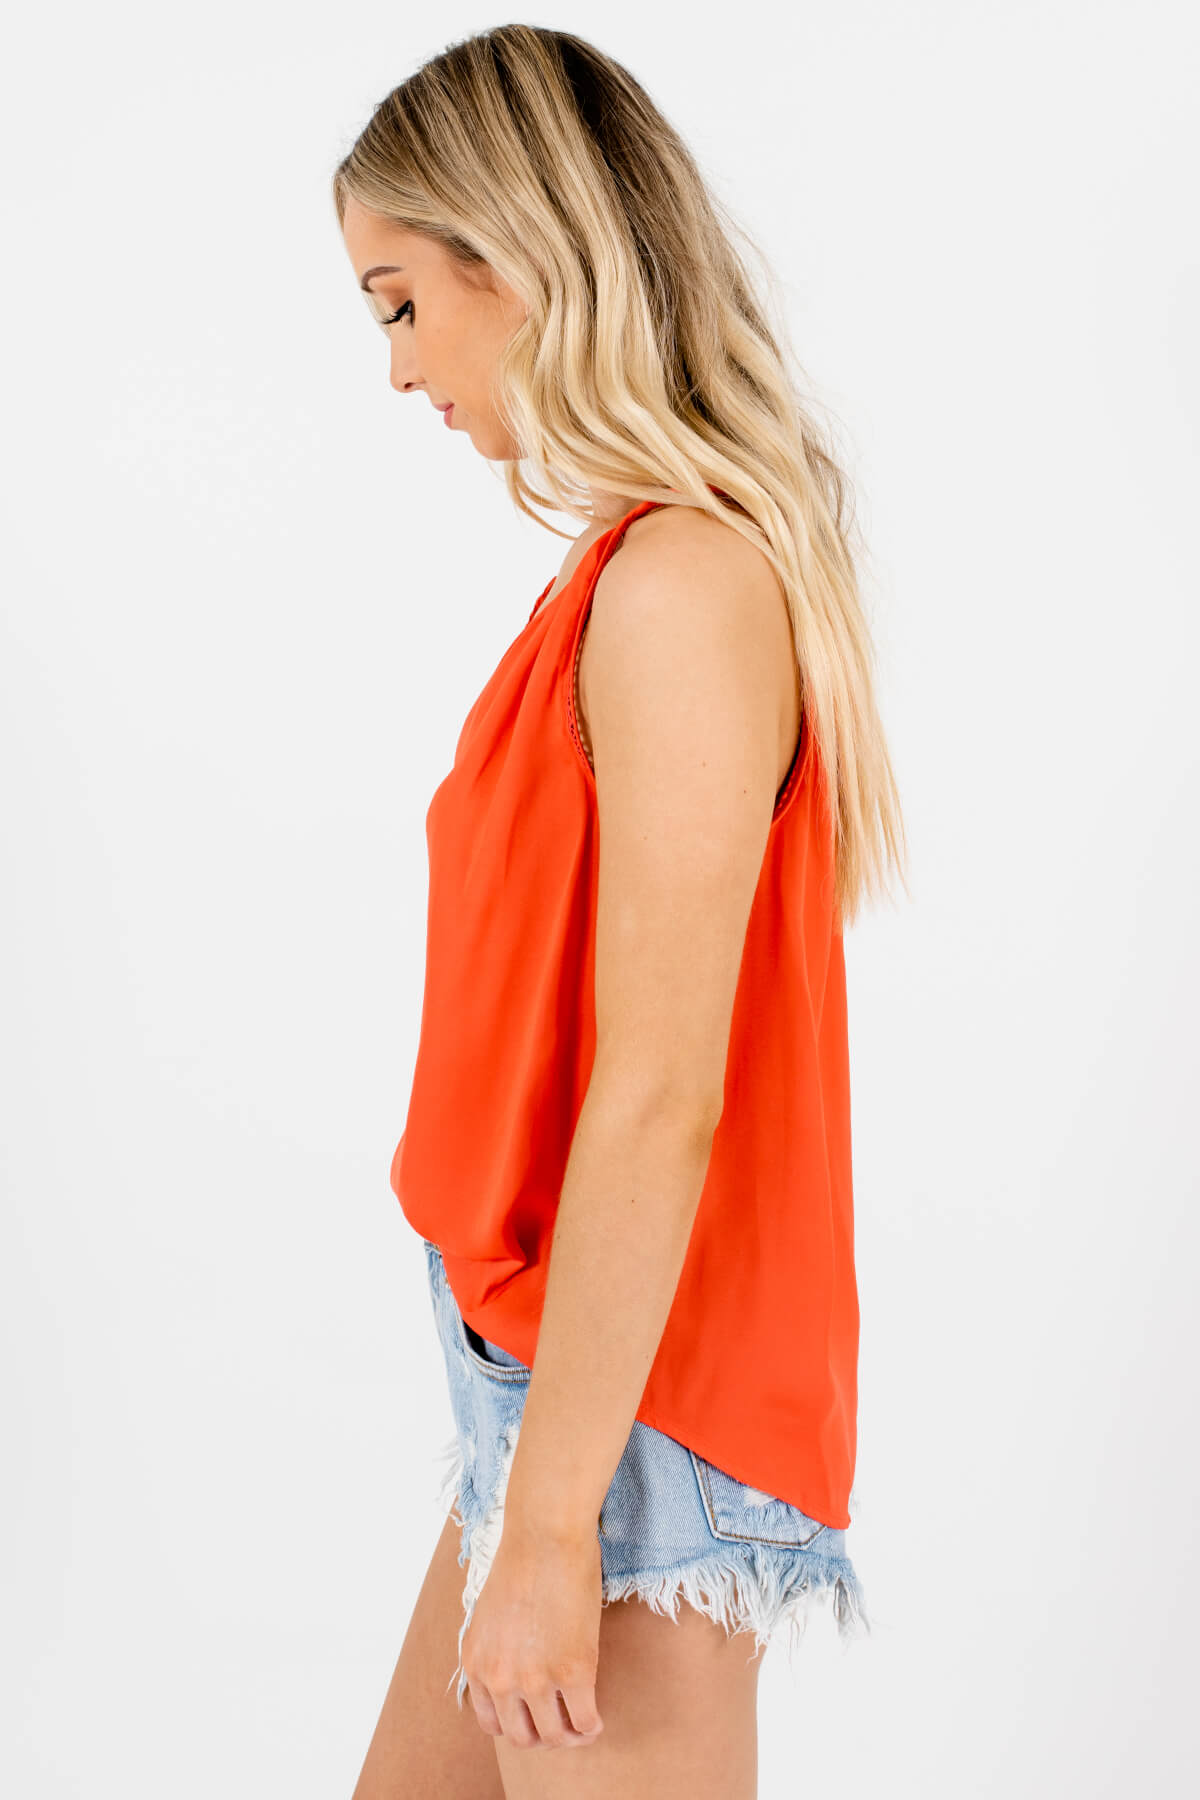 Women's Coral Silky Material Boutique Tank Tops 